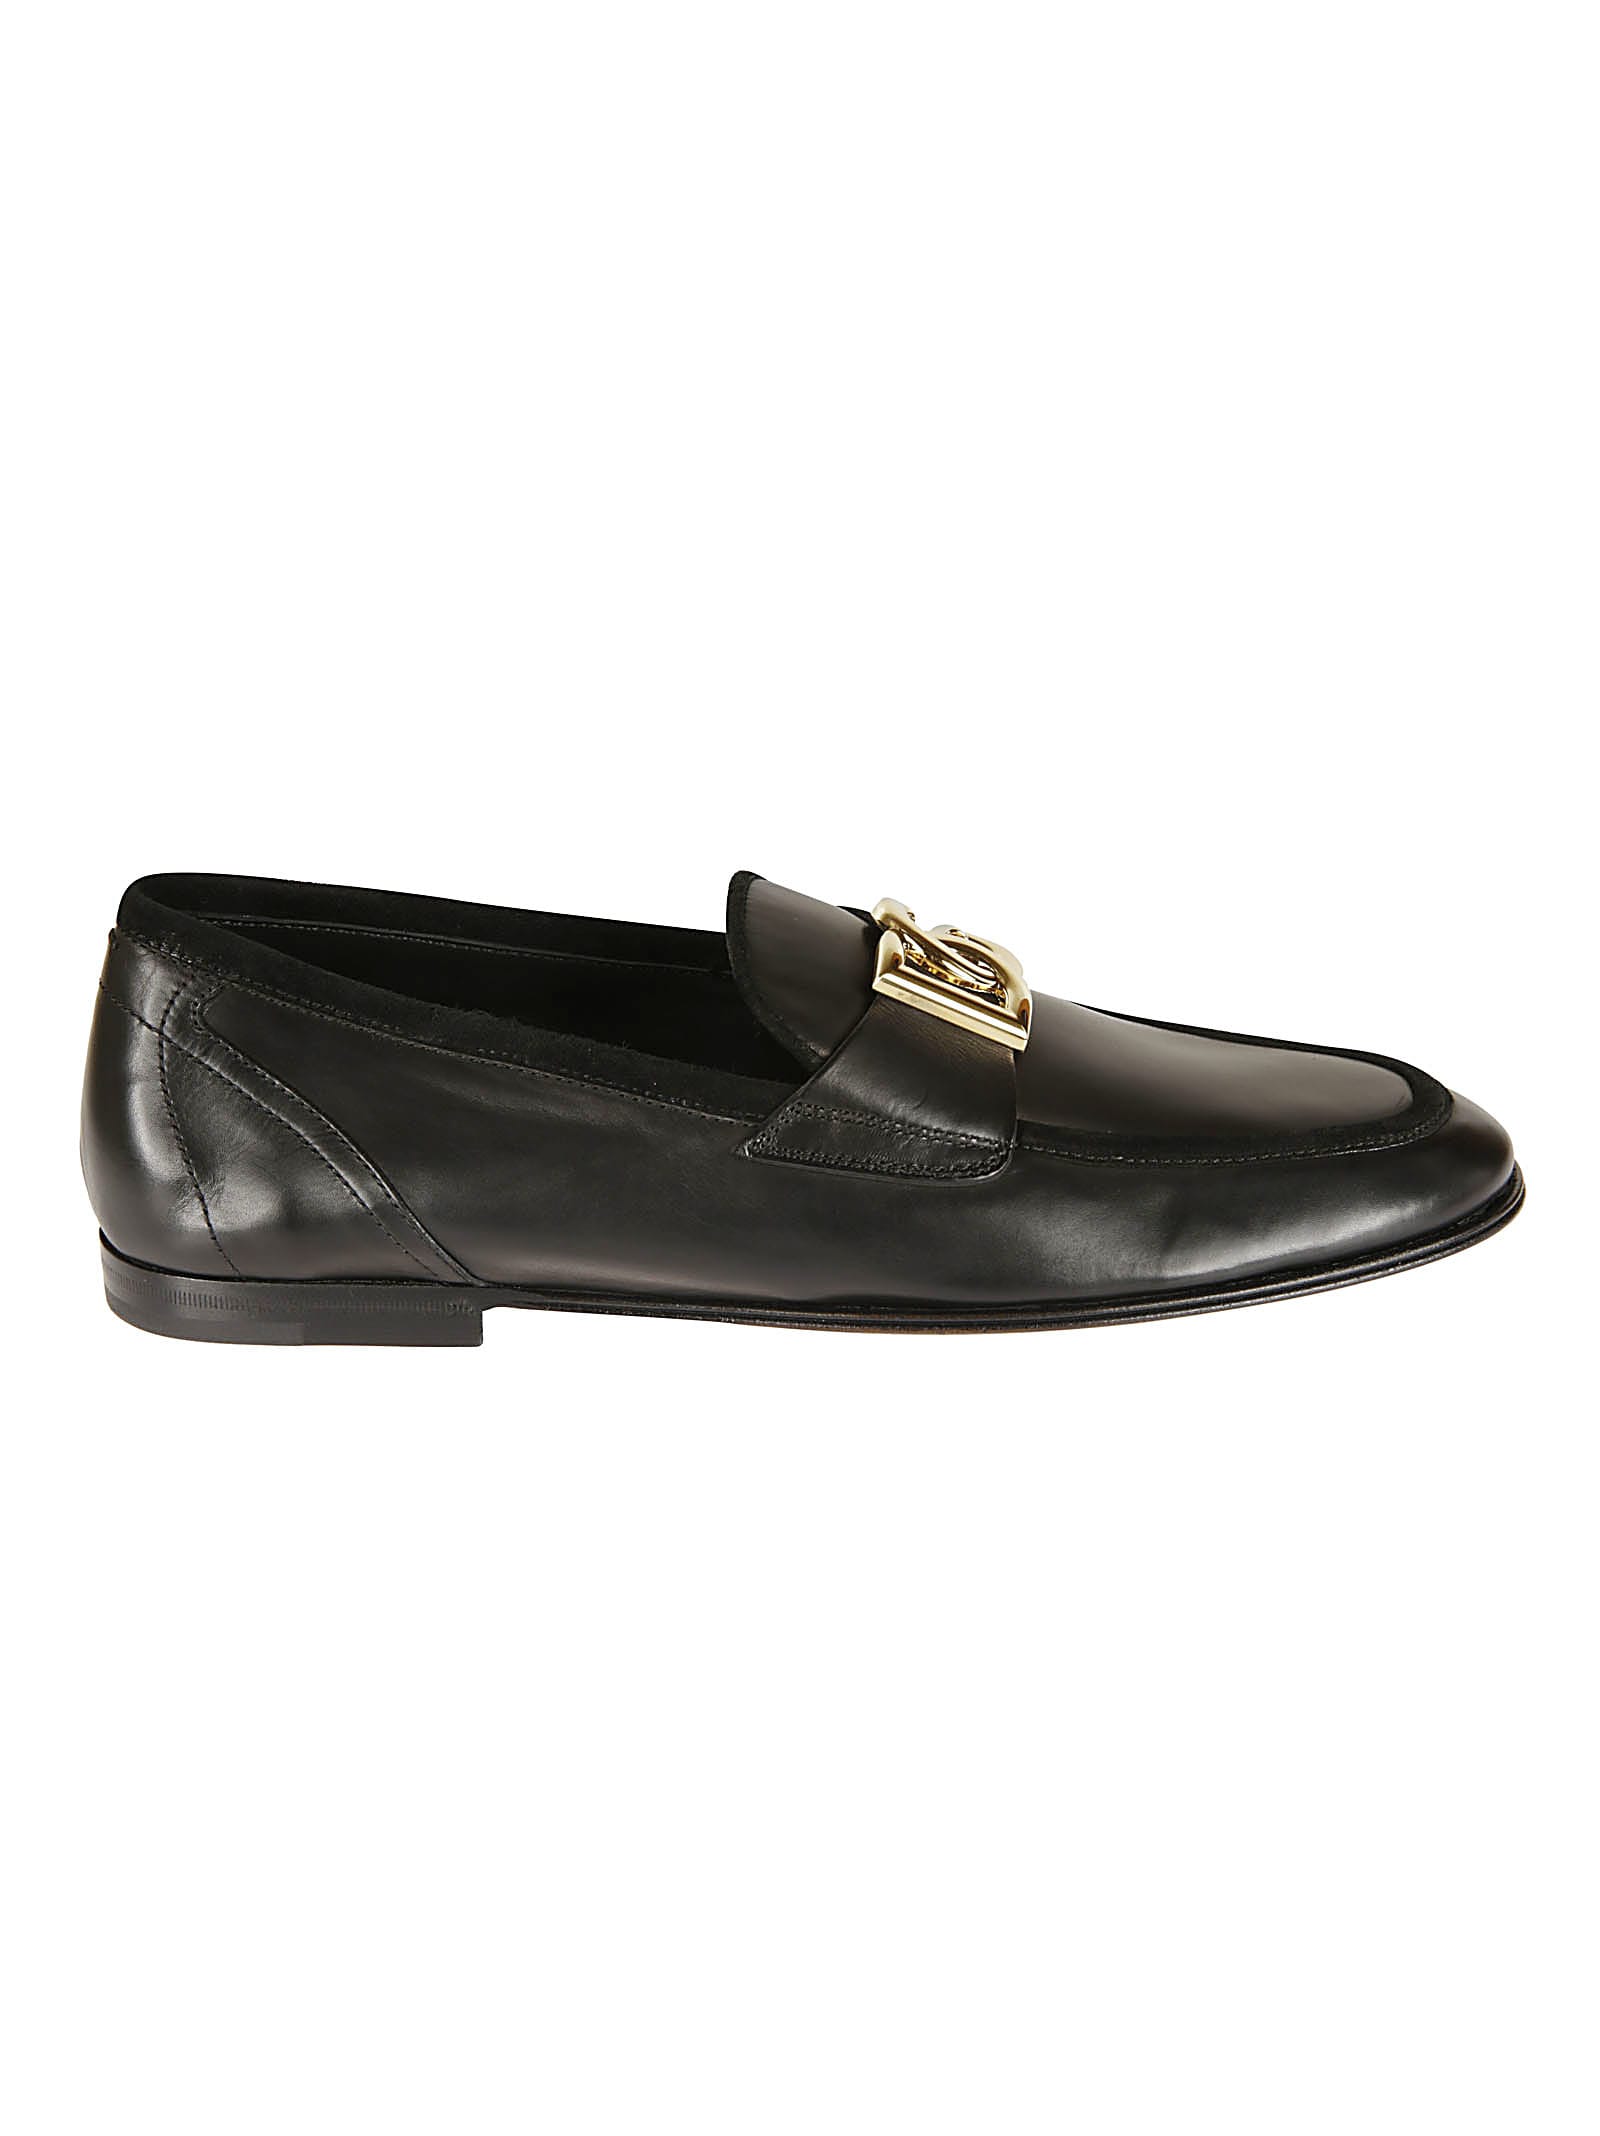 Dolce & Gabbana Logo Plaque Loafers